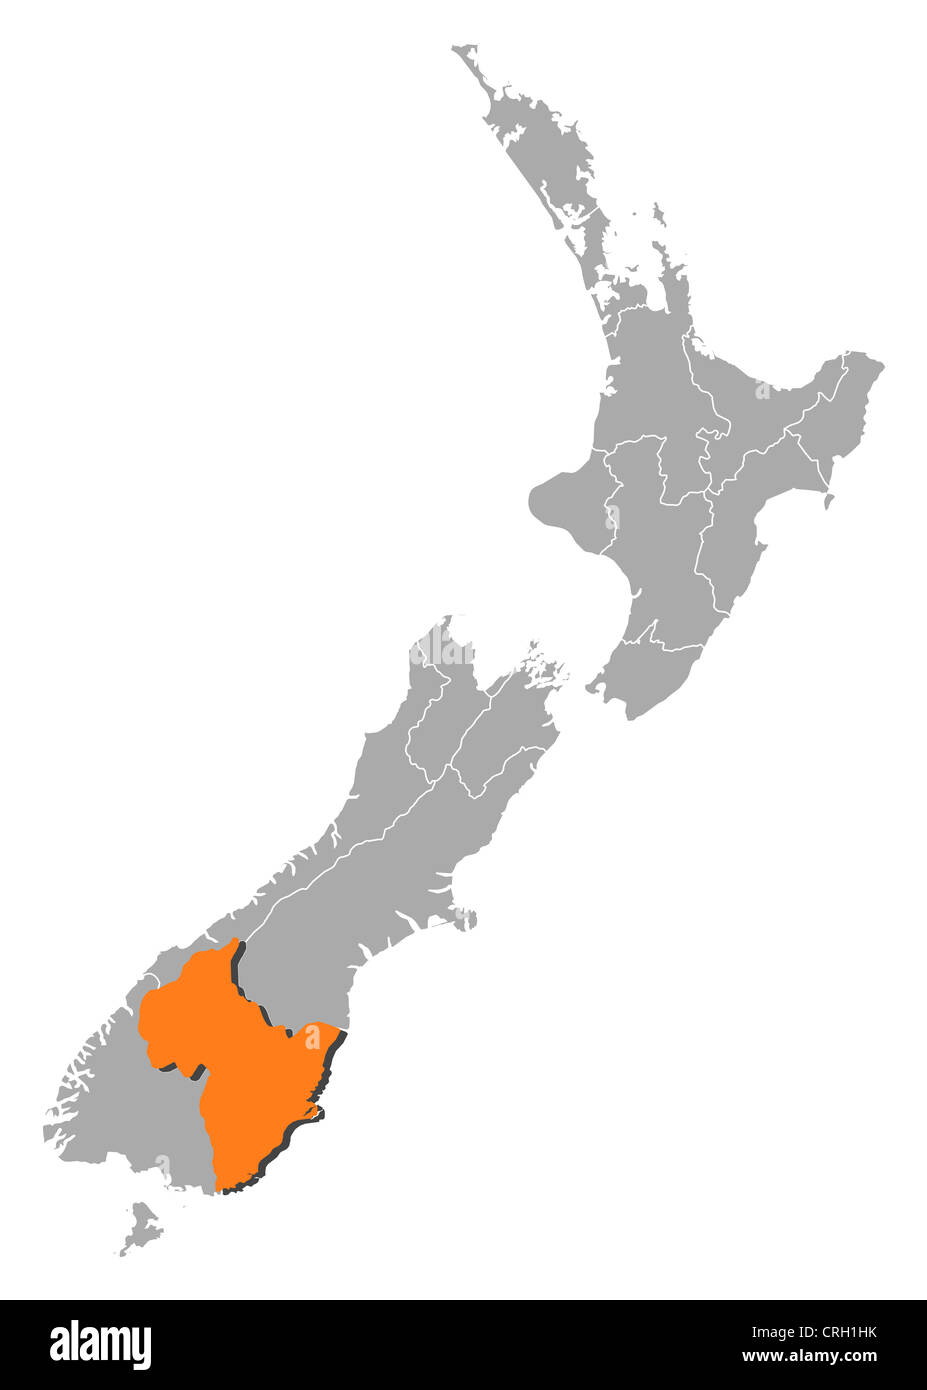 Political map of New Zealand with the several regions where Otago is highlighted. Stock Photo